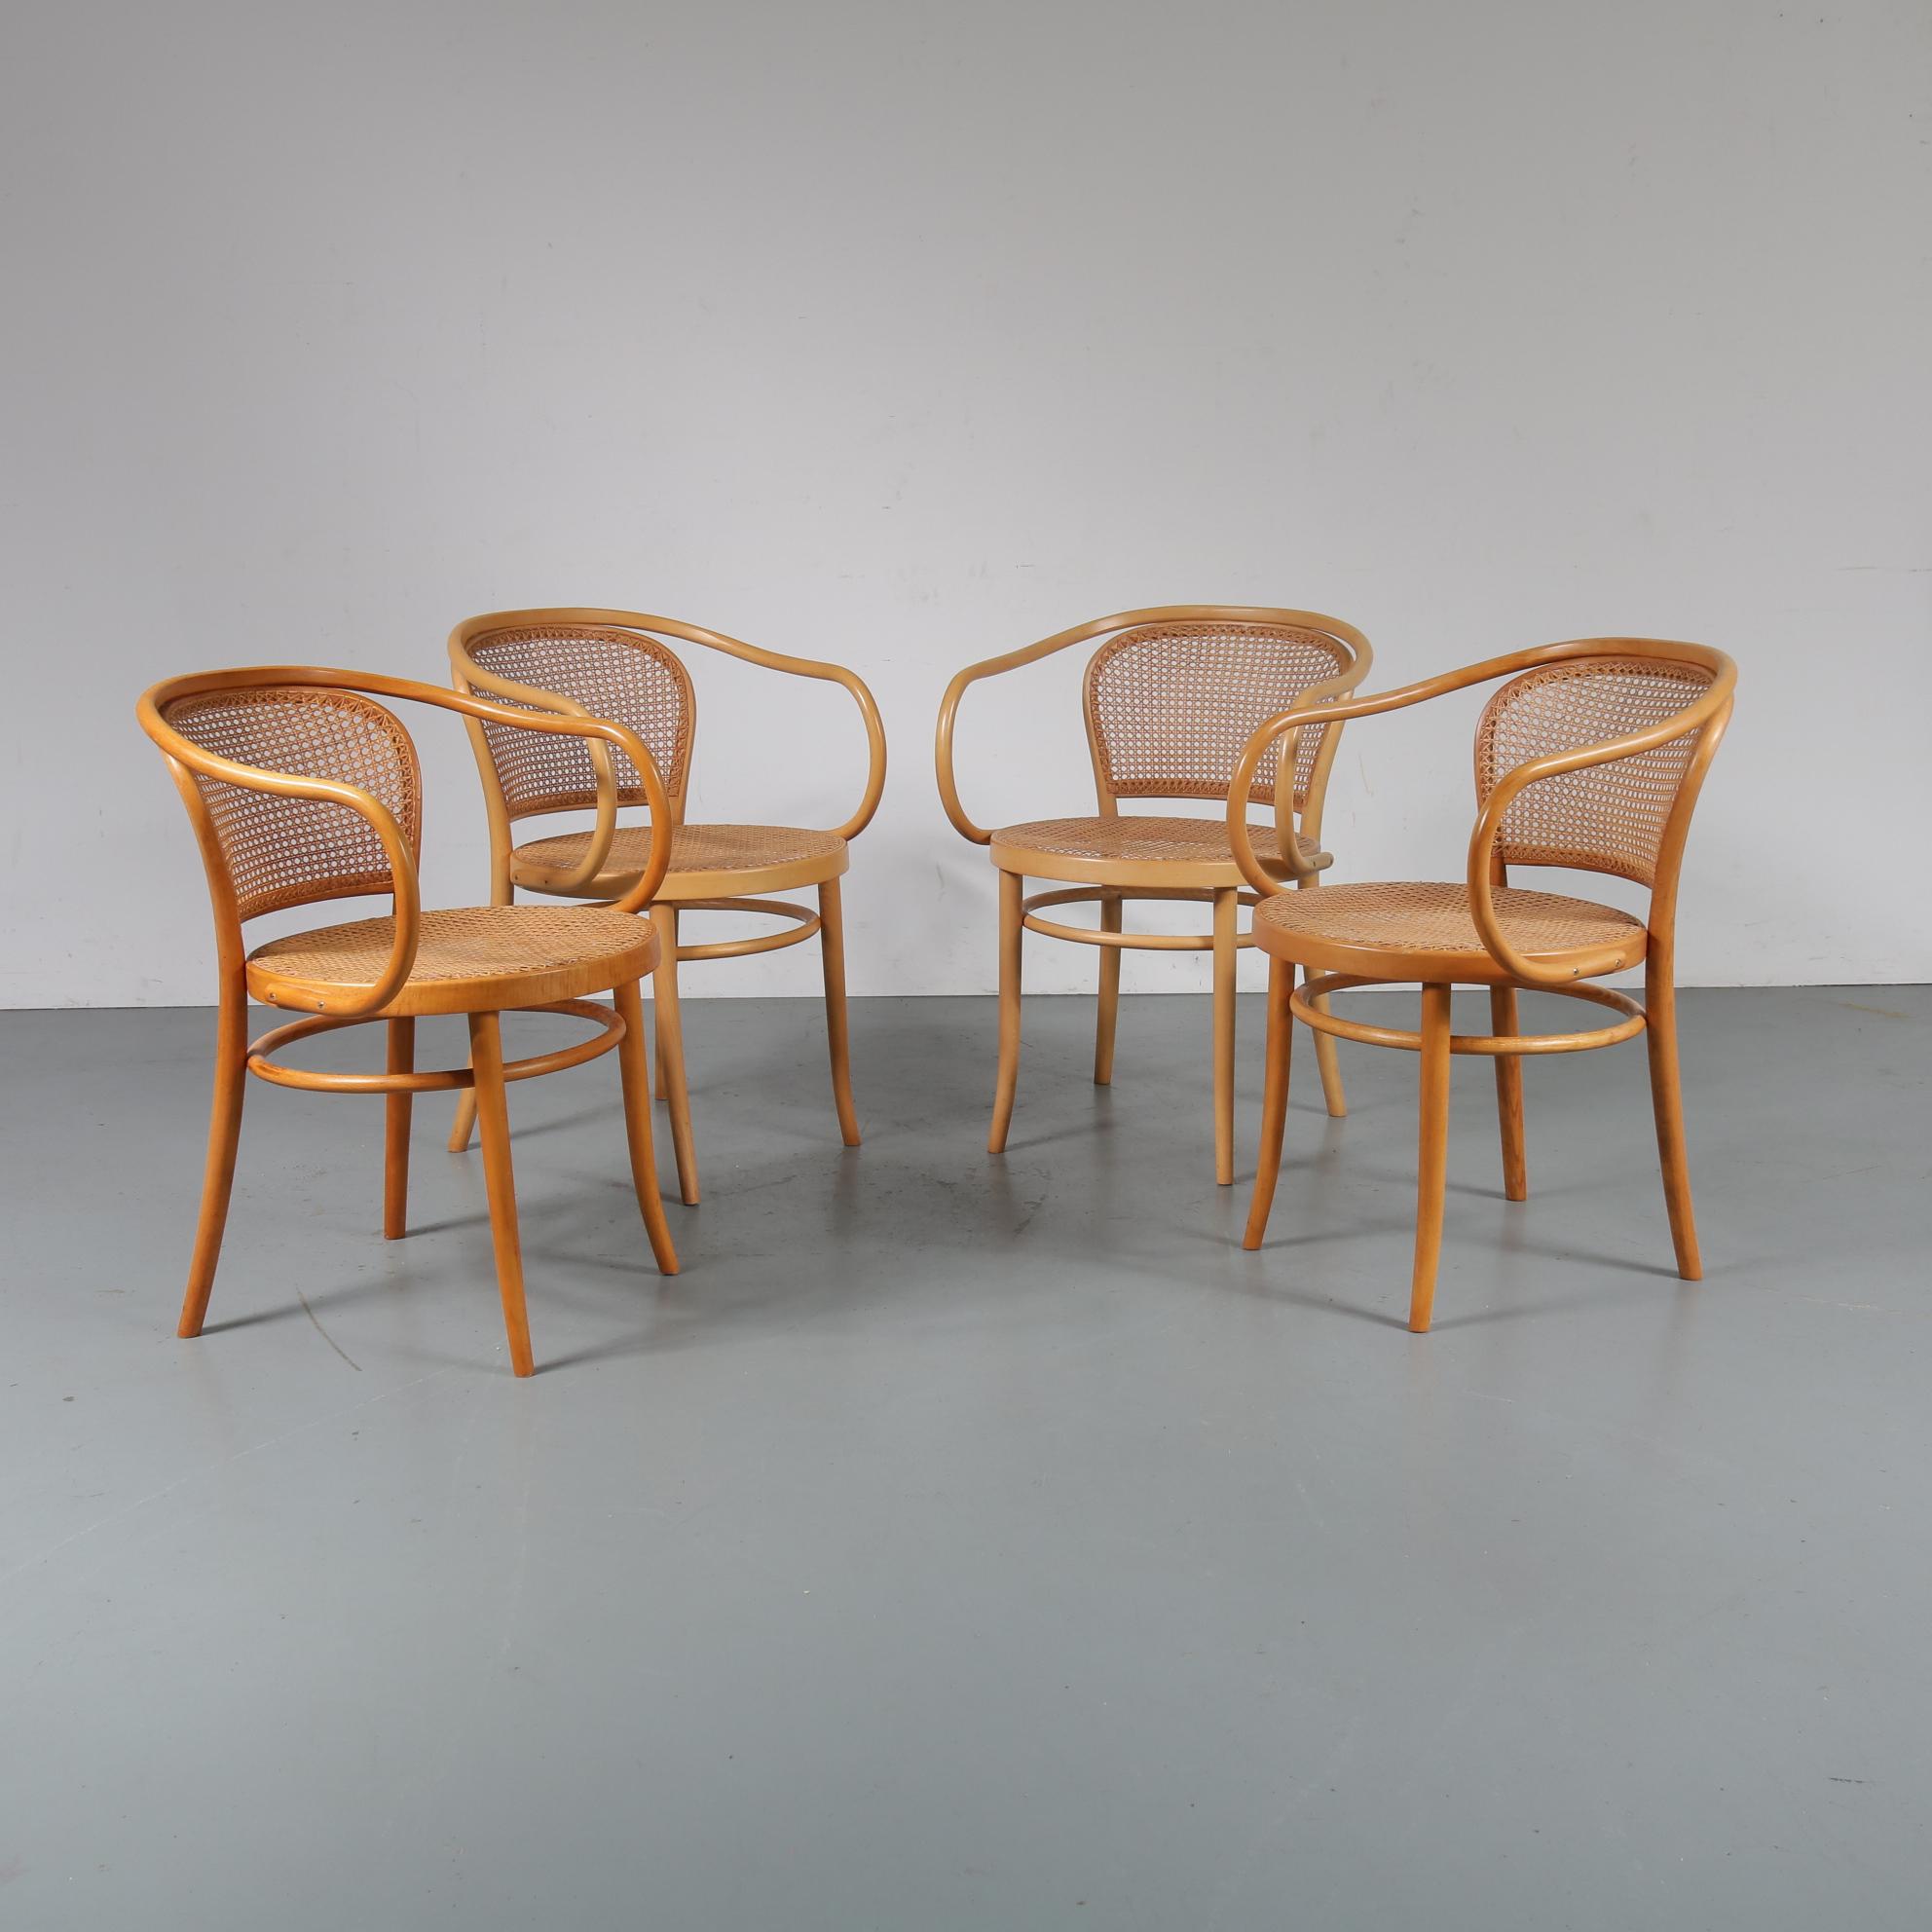 Beautiful set of five bentwood armchairs designed by Michael Thonet in Germany around 1920, commissioned by Le Corbusier. These are more recent editions, manufactured around 1980.

These eye-catching chairs are made of high quality beech wood with